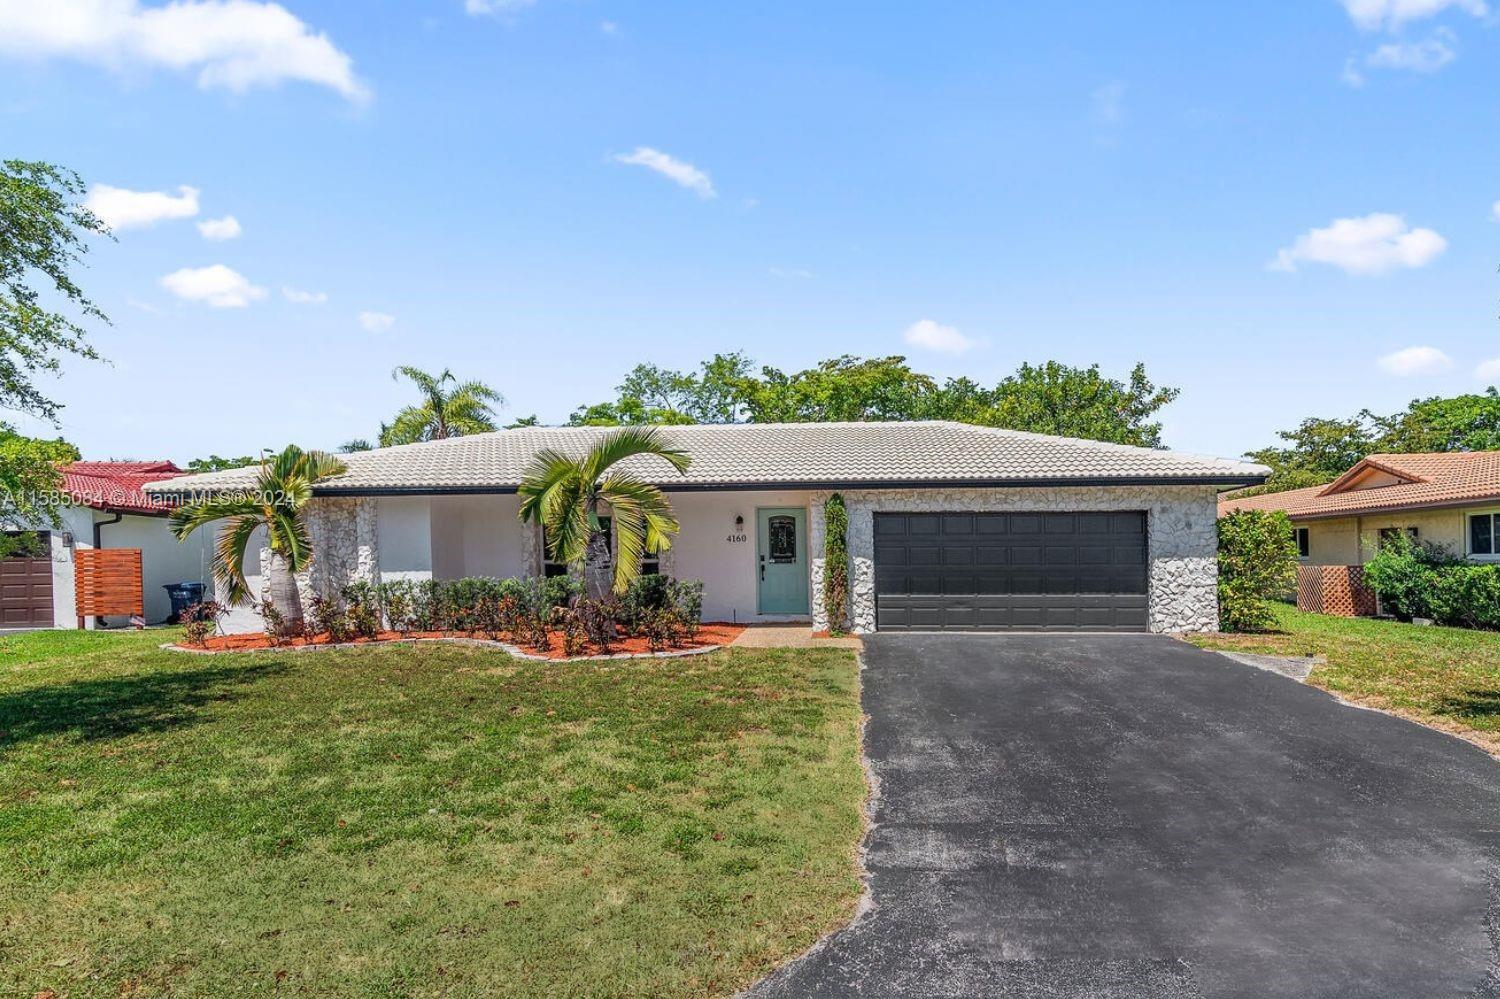 Property for Sale at 4160 Nw 113th Ave, Coral Springs, Broward County, Florida - Bedrooms: 3 
Bathrooms: 2  - $650,000